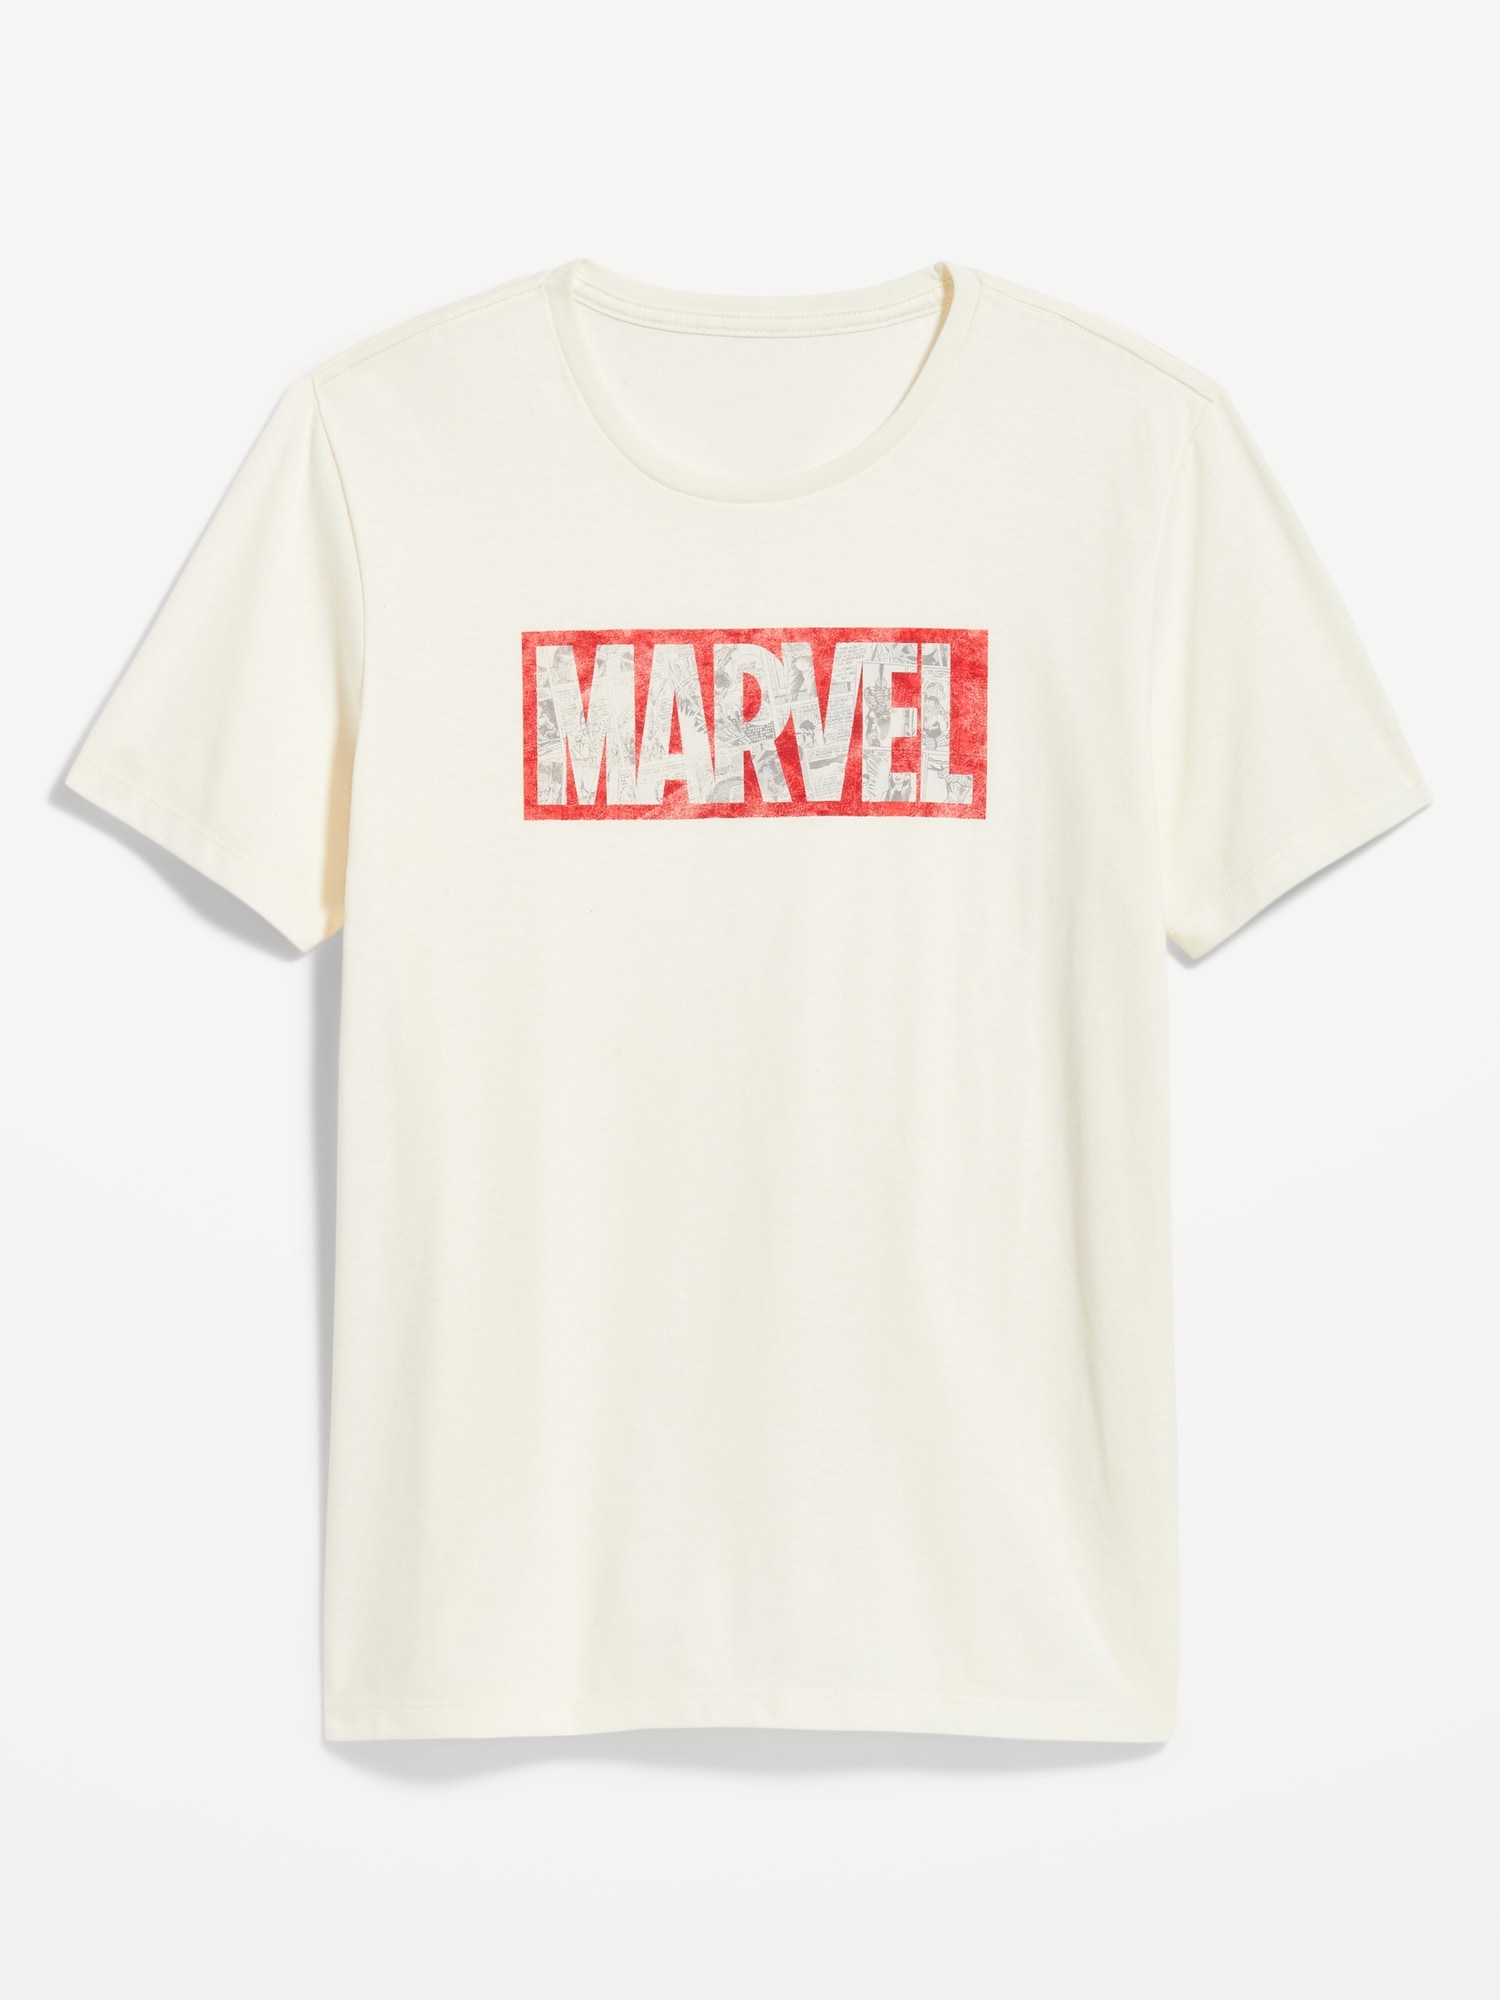 Old Navy Marvel™ Logo-Graphic Gender-Neutral T-Shirt for Adults white. 1